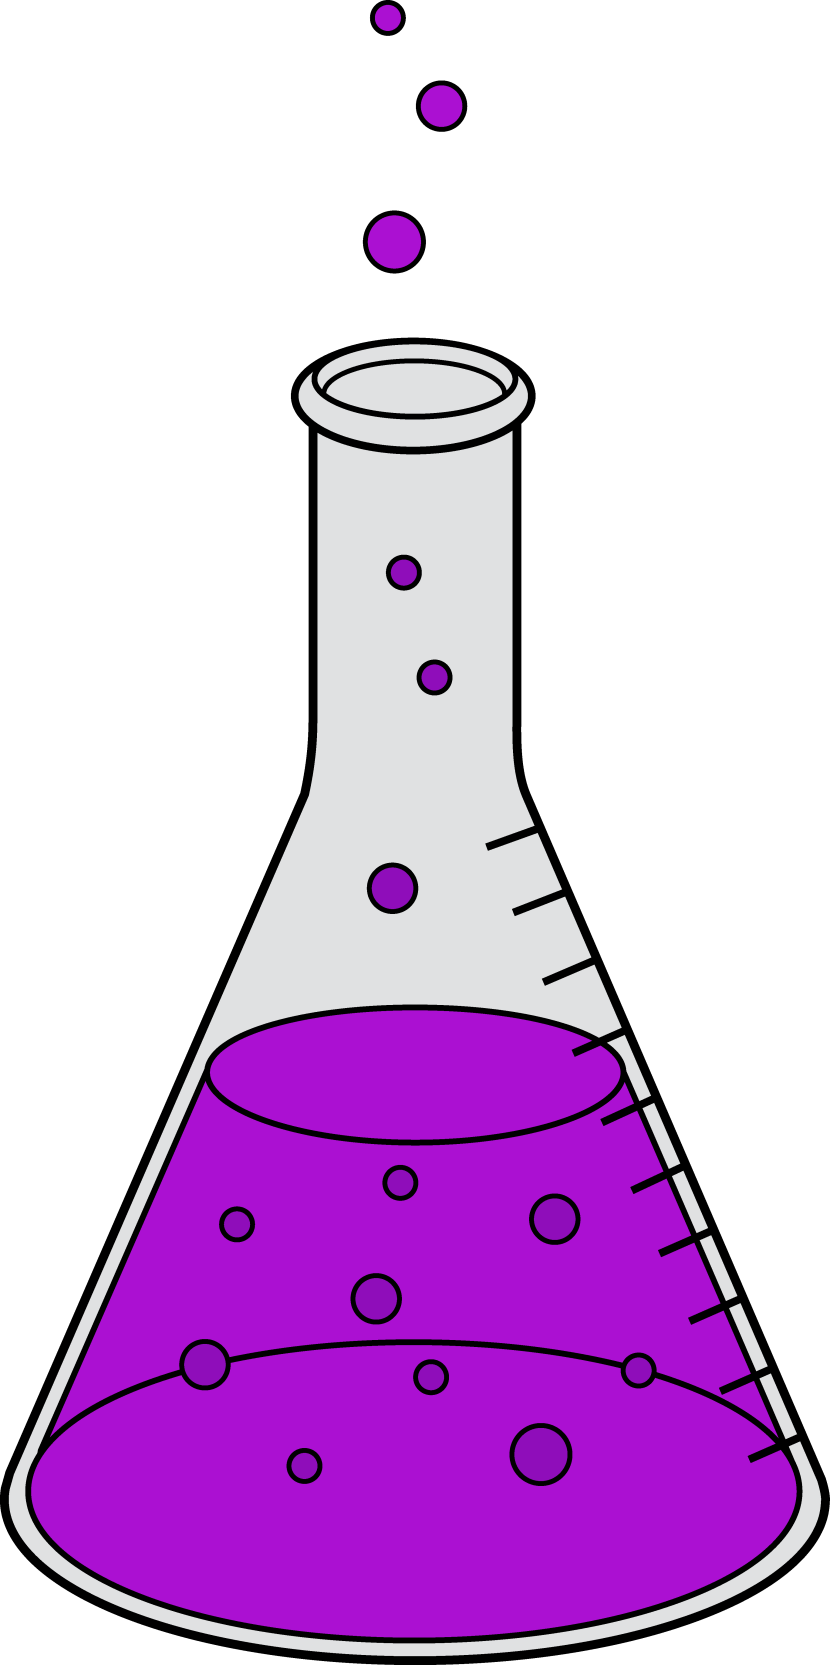 Free science cliparts download. Beaker clipart chemistry